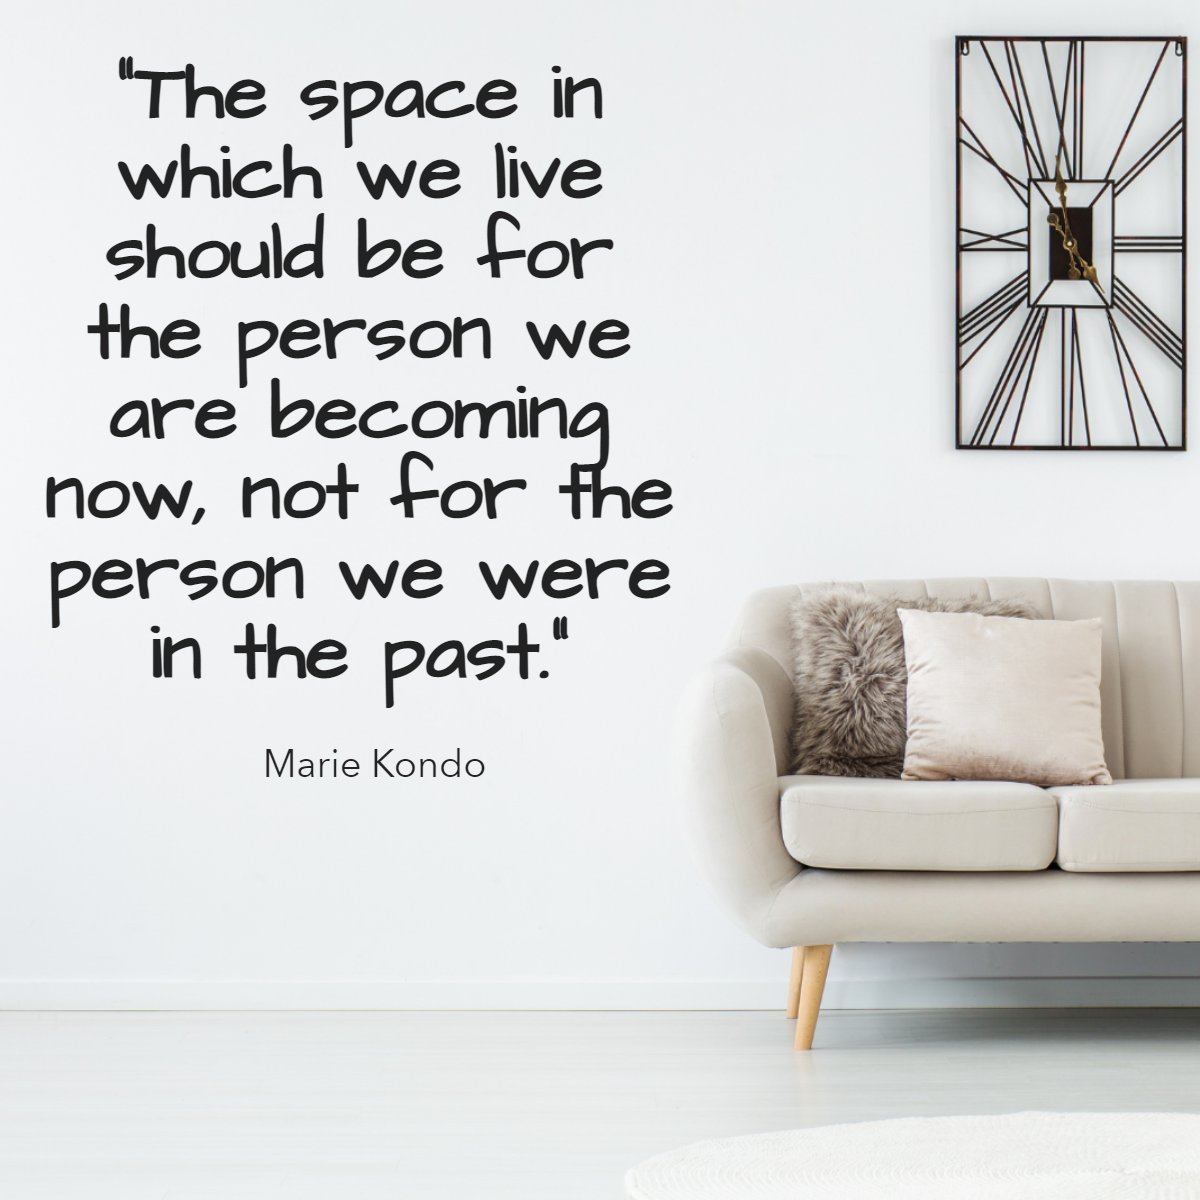 'The space in which we live should be for the person we are becoming now, not for the person we were in the past.' 
― Marie Kondo 📖

#space #realestate #room #buy #sell #property #home #house #quoteoftheday #mariekondo #quotes
 #francinesellsbaldwin